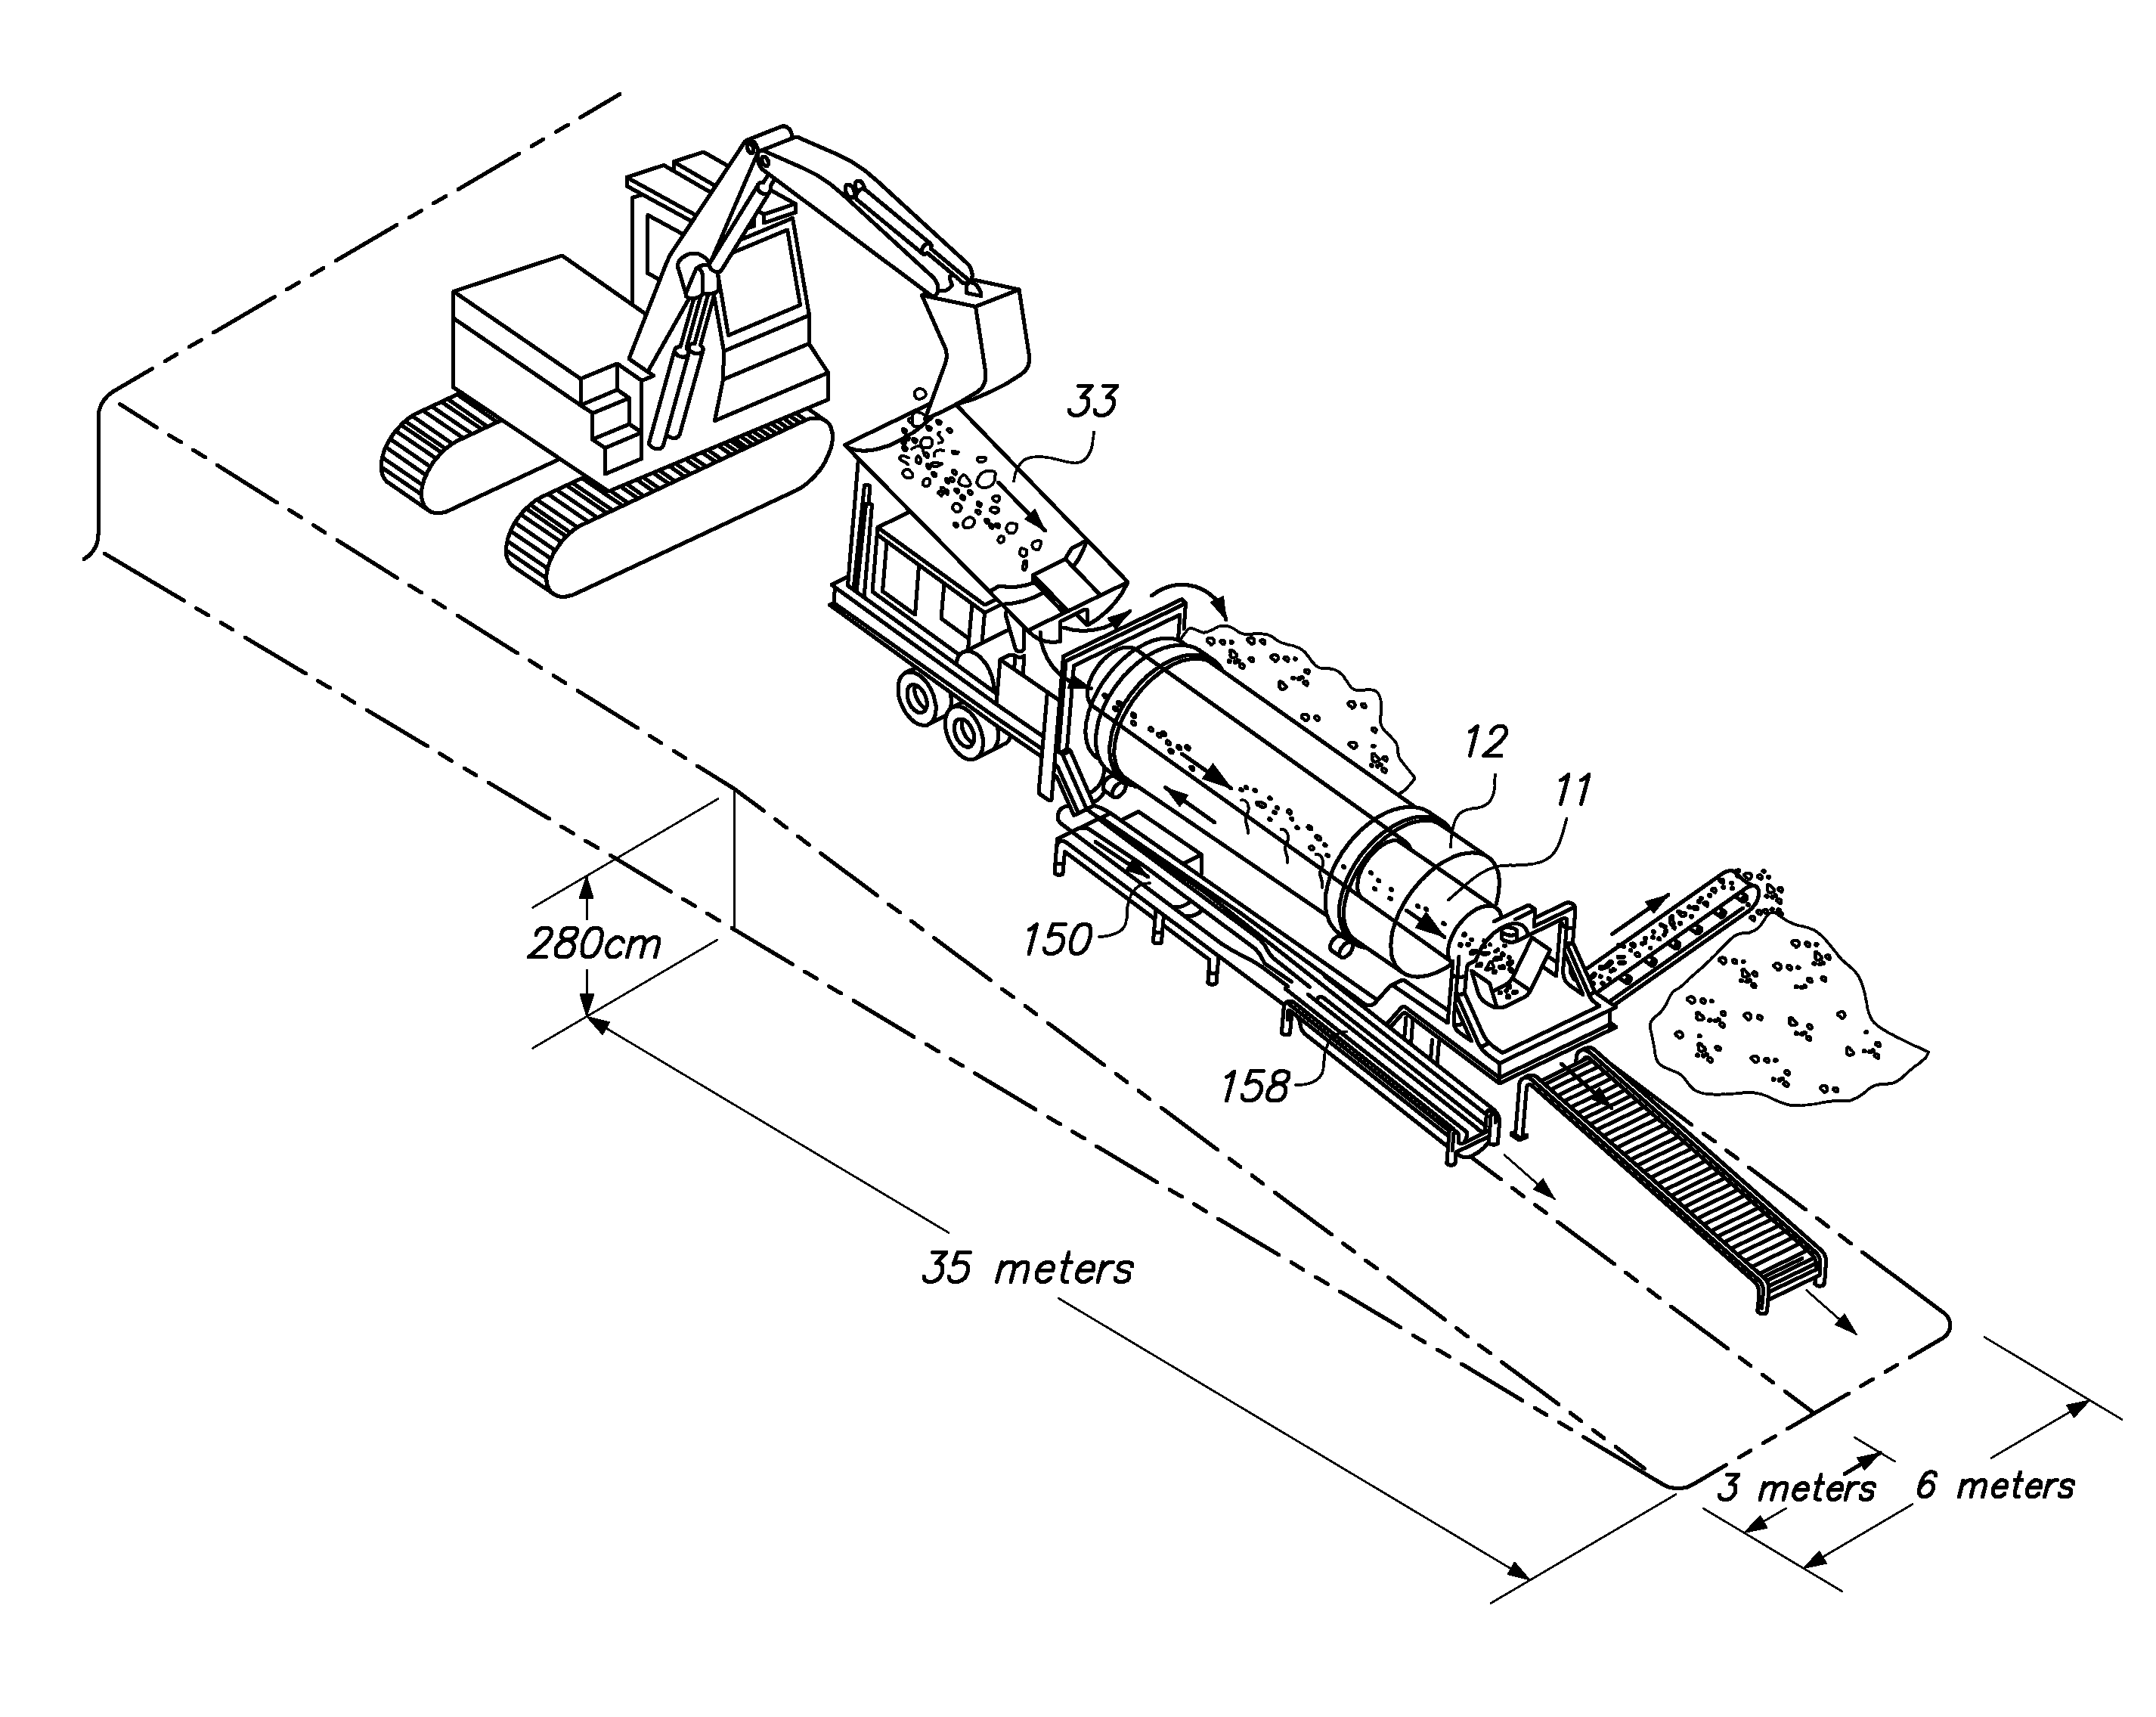 Method for Extracting Heavy Metals from Hard Rock and Alluvial Ore